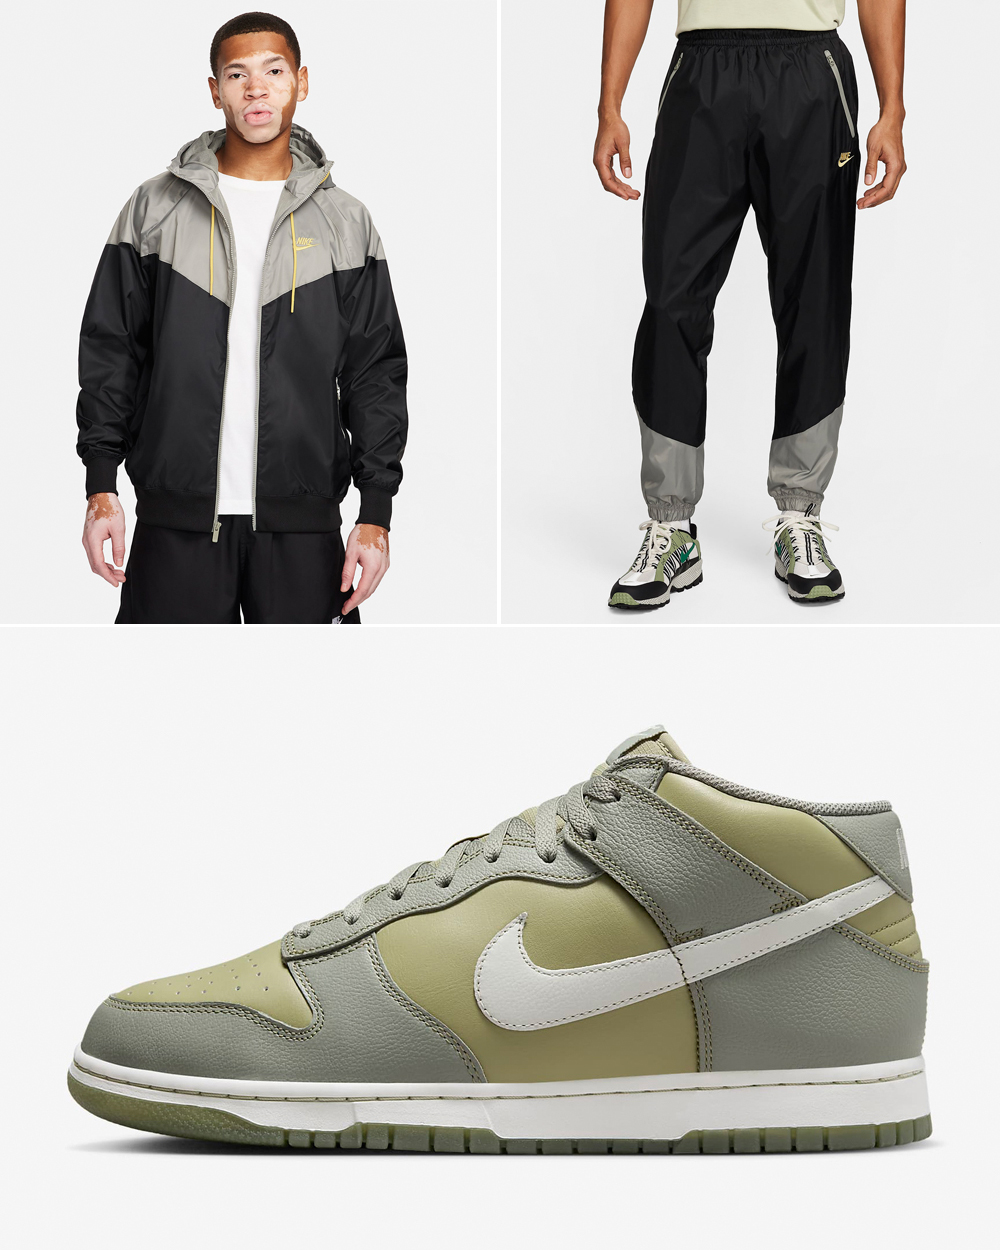 Nike-Dunk-Mid-Dark-Stucco-Jacket-Pants-Matching-Outfit